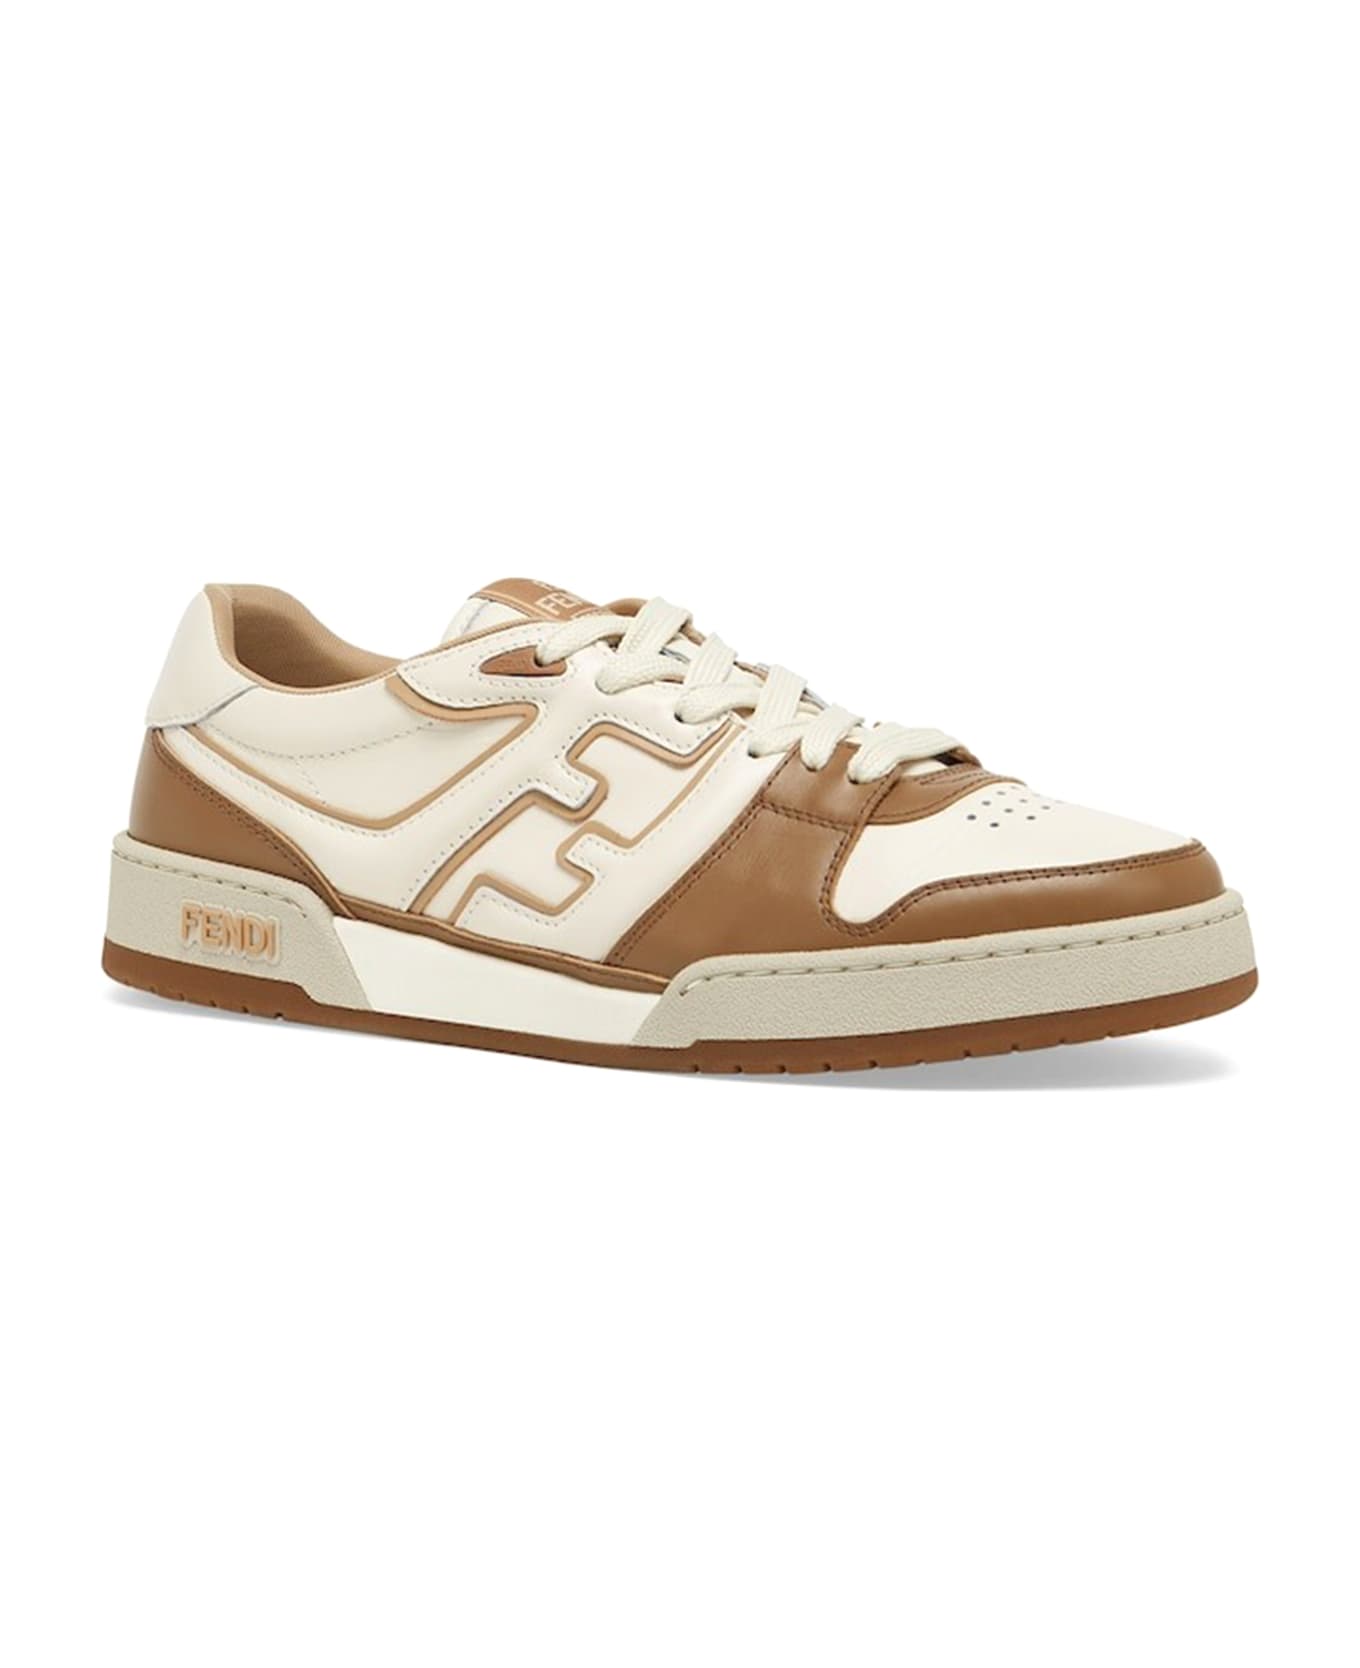 Fendi Low Top Sneaker In Brown Leather - NOCCIOLA BIANCO MOU MOU スニーカー